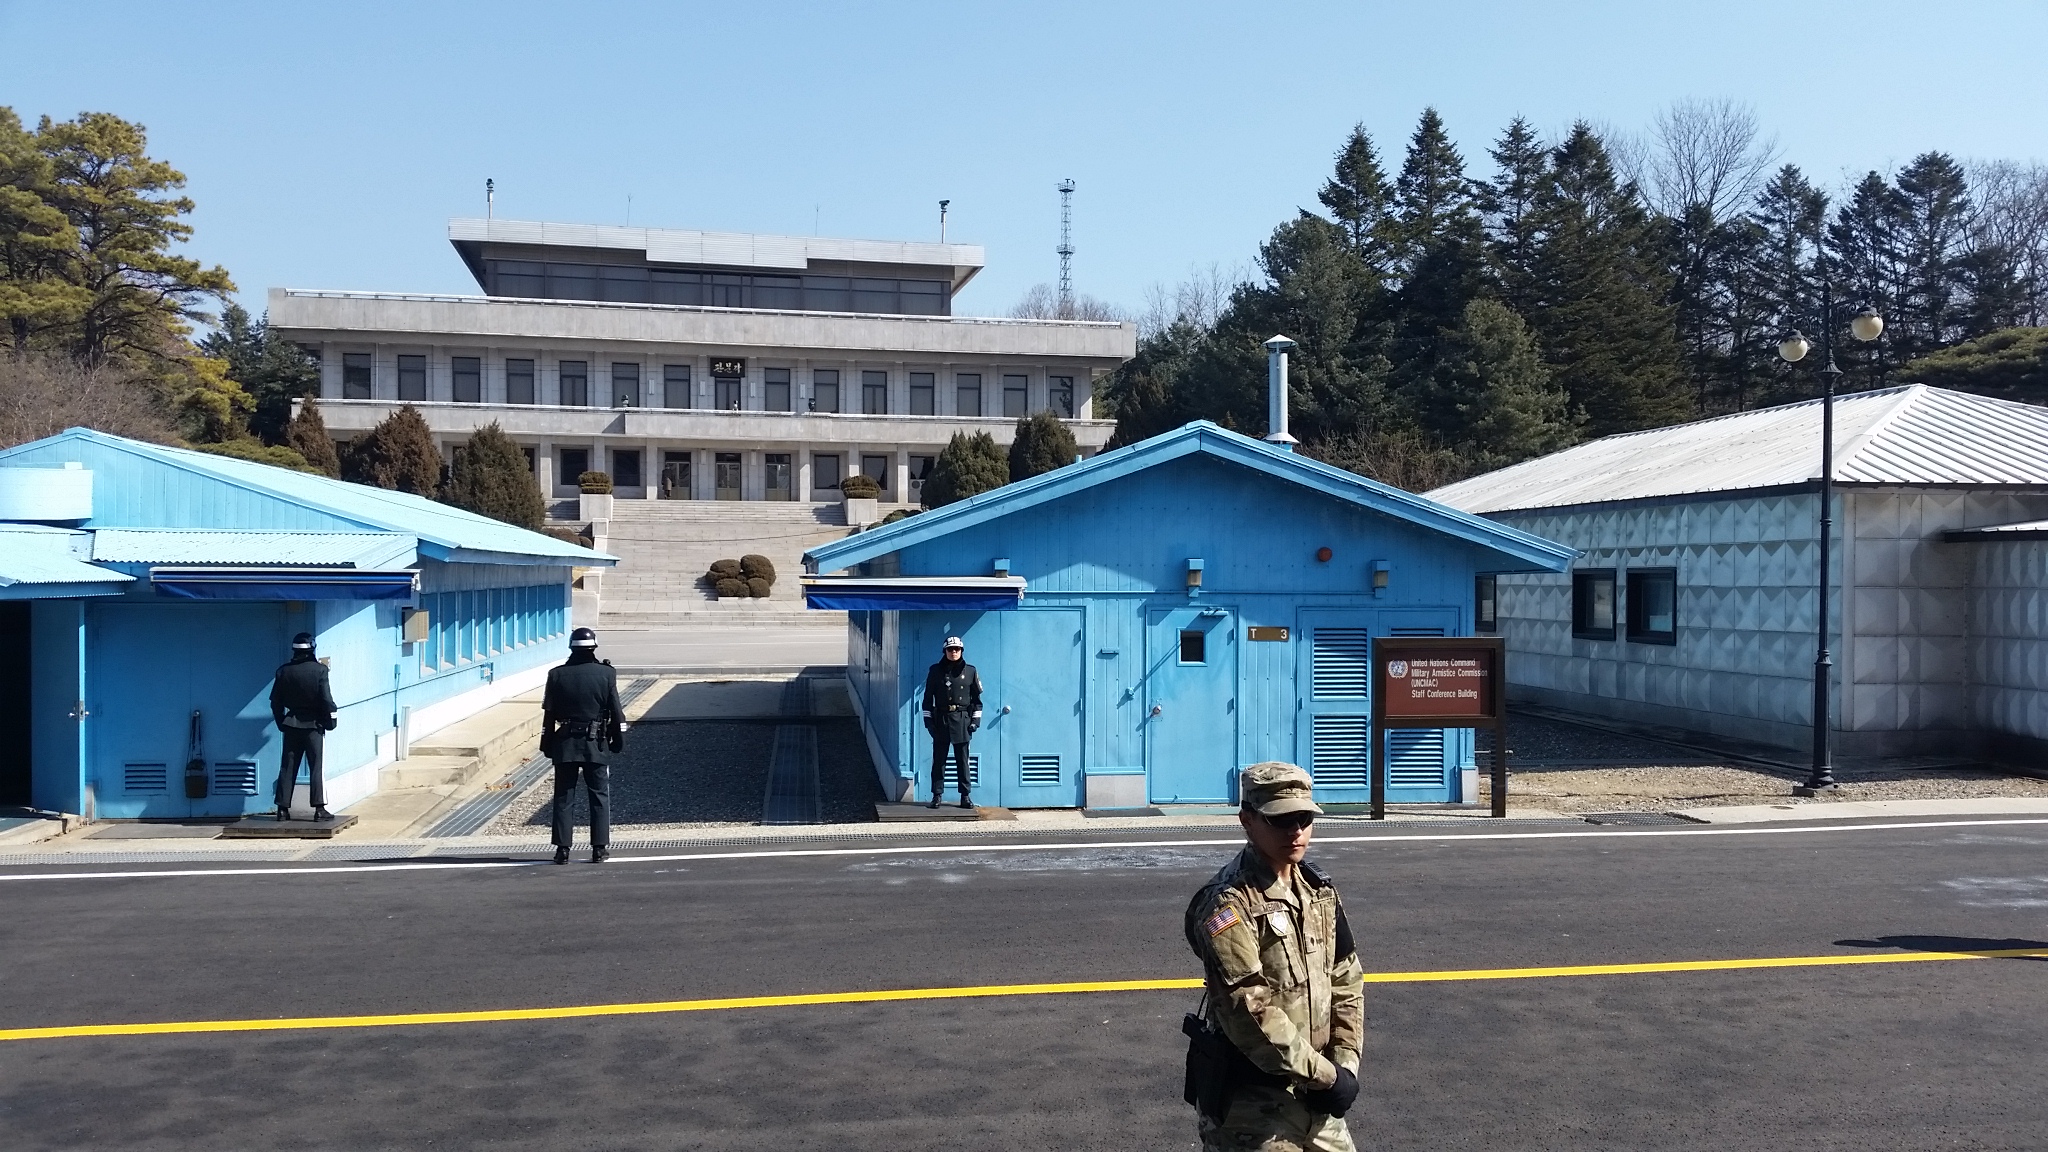 North Korea's Panmungak building, visible in the background behind Buildings T-2 and T-3.